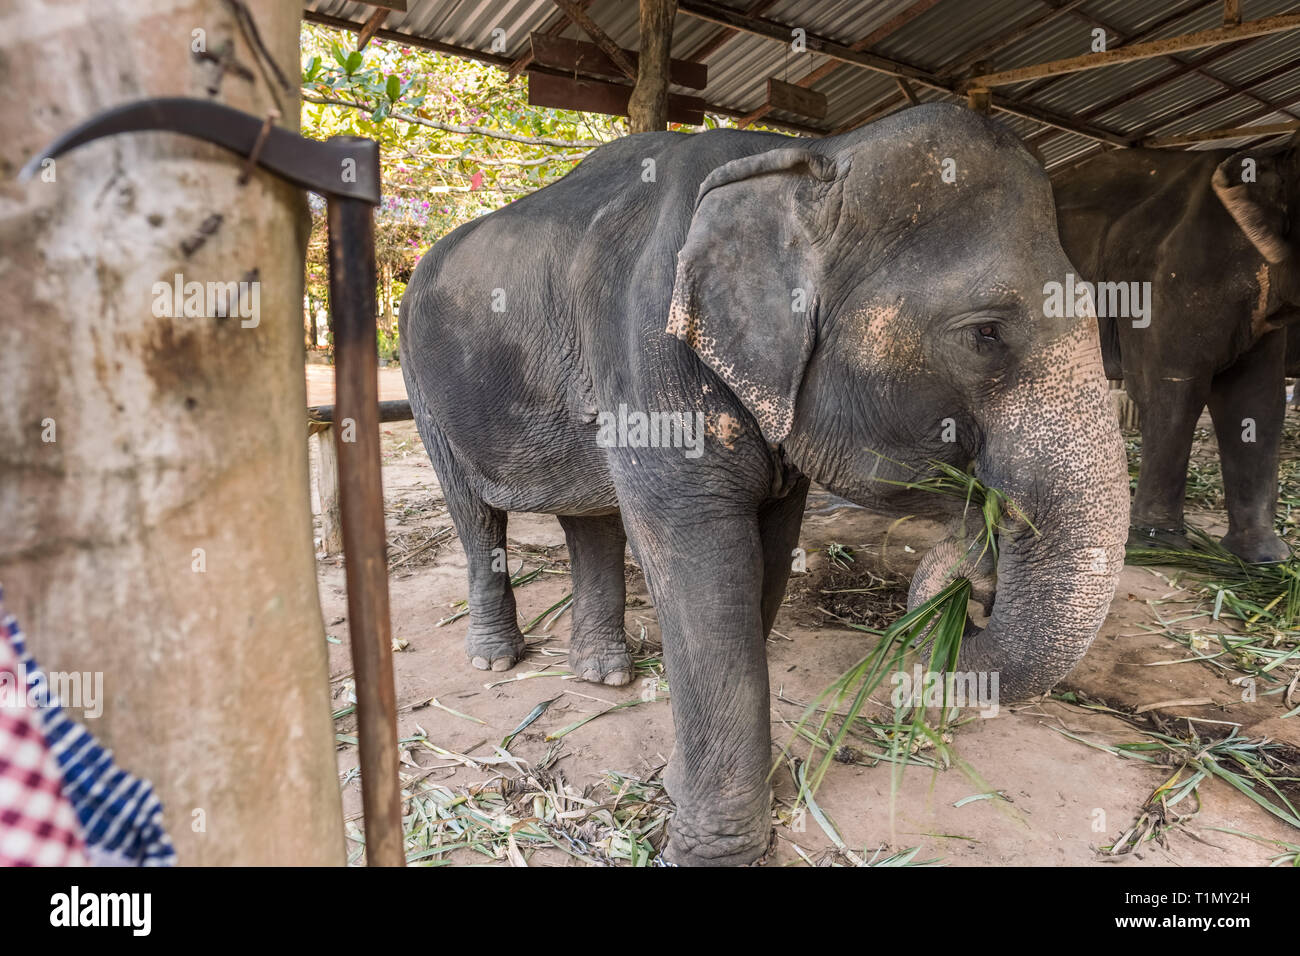 Unethical elephant tourism in Thailand Stock Photo